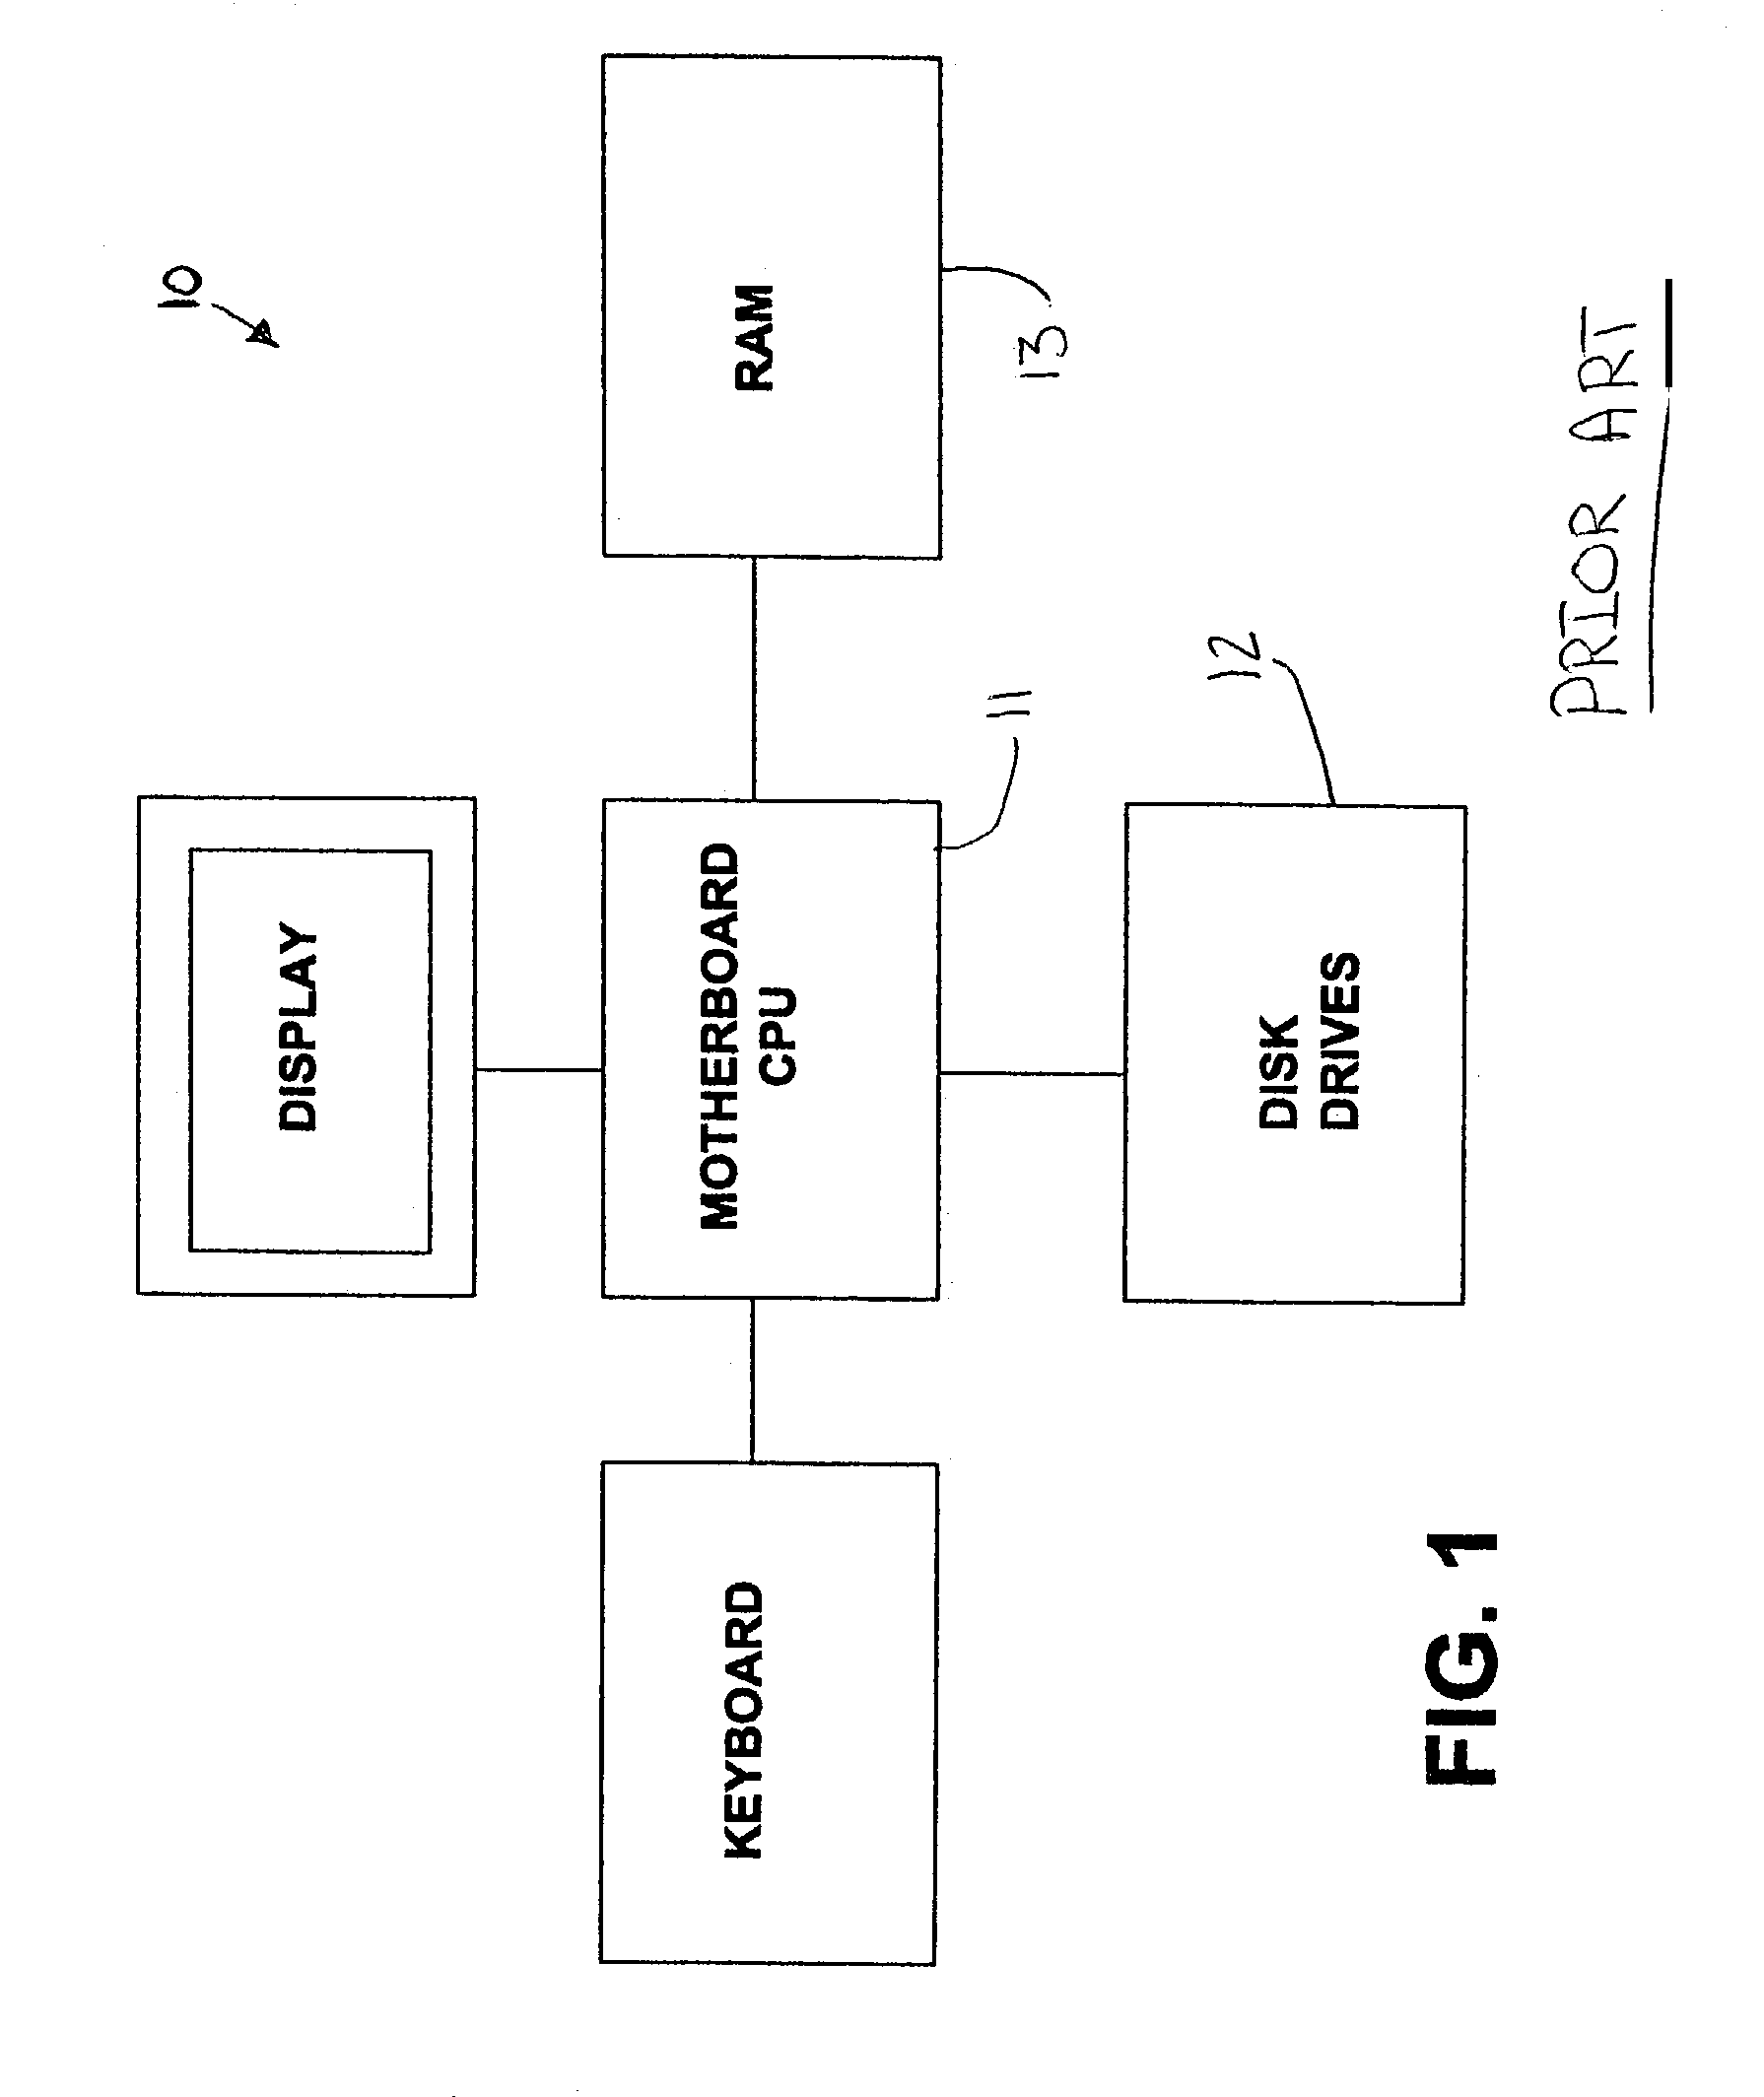 Storage controller with the disk drive and the RAM in a hybrid architecture